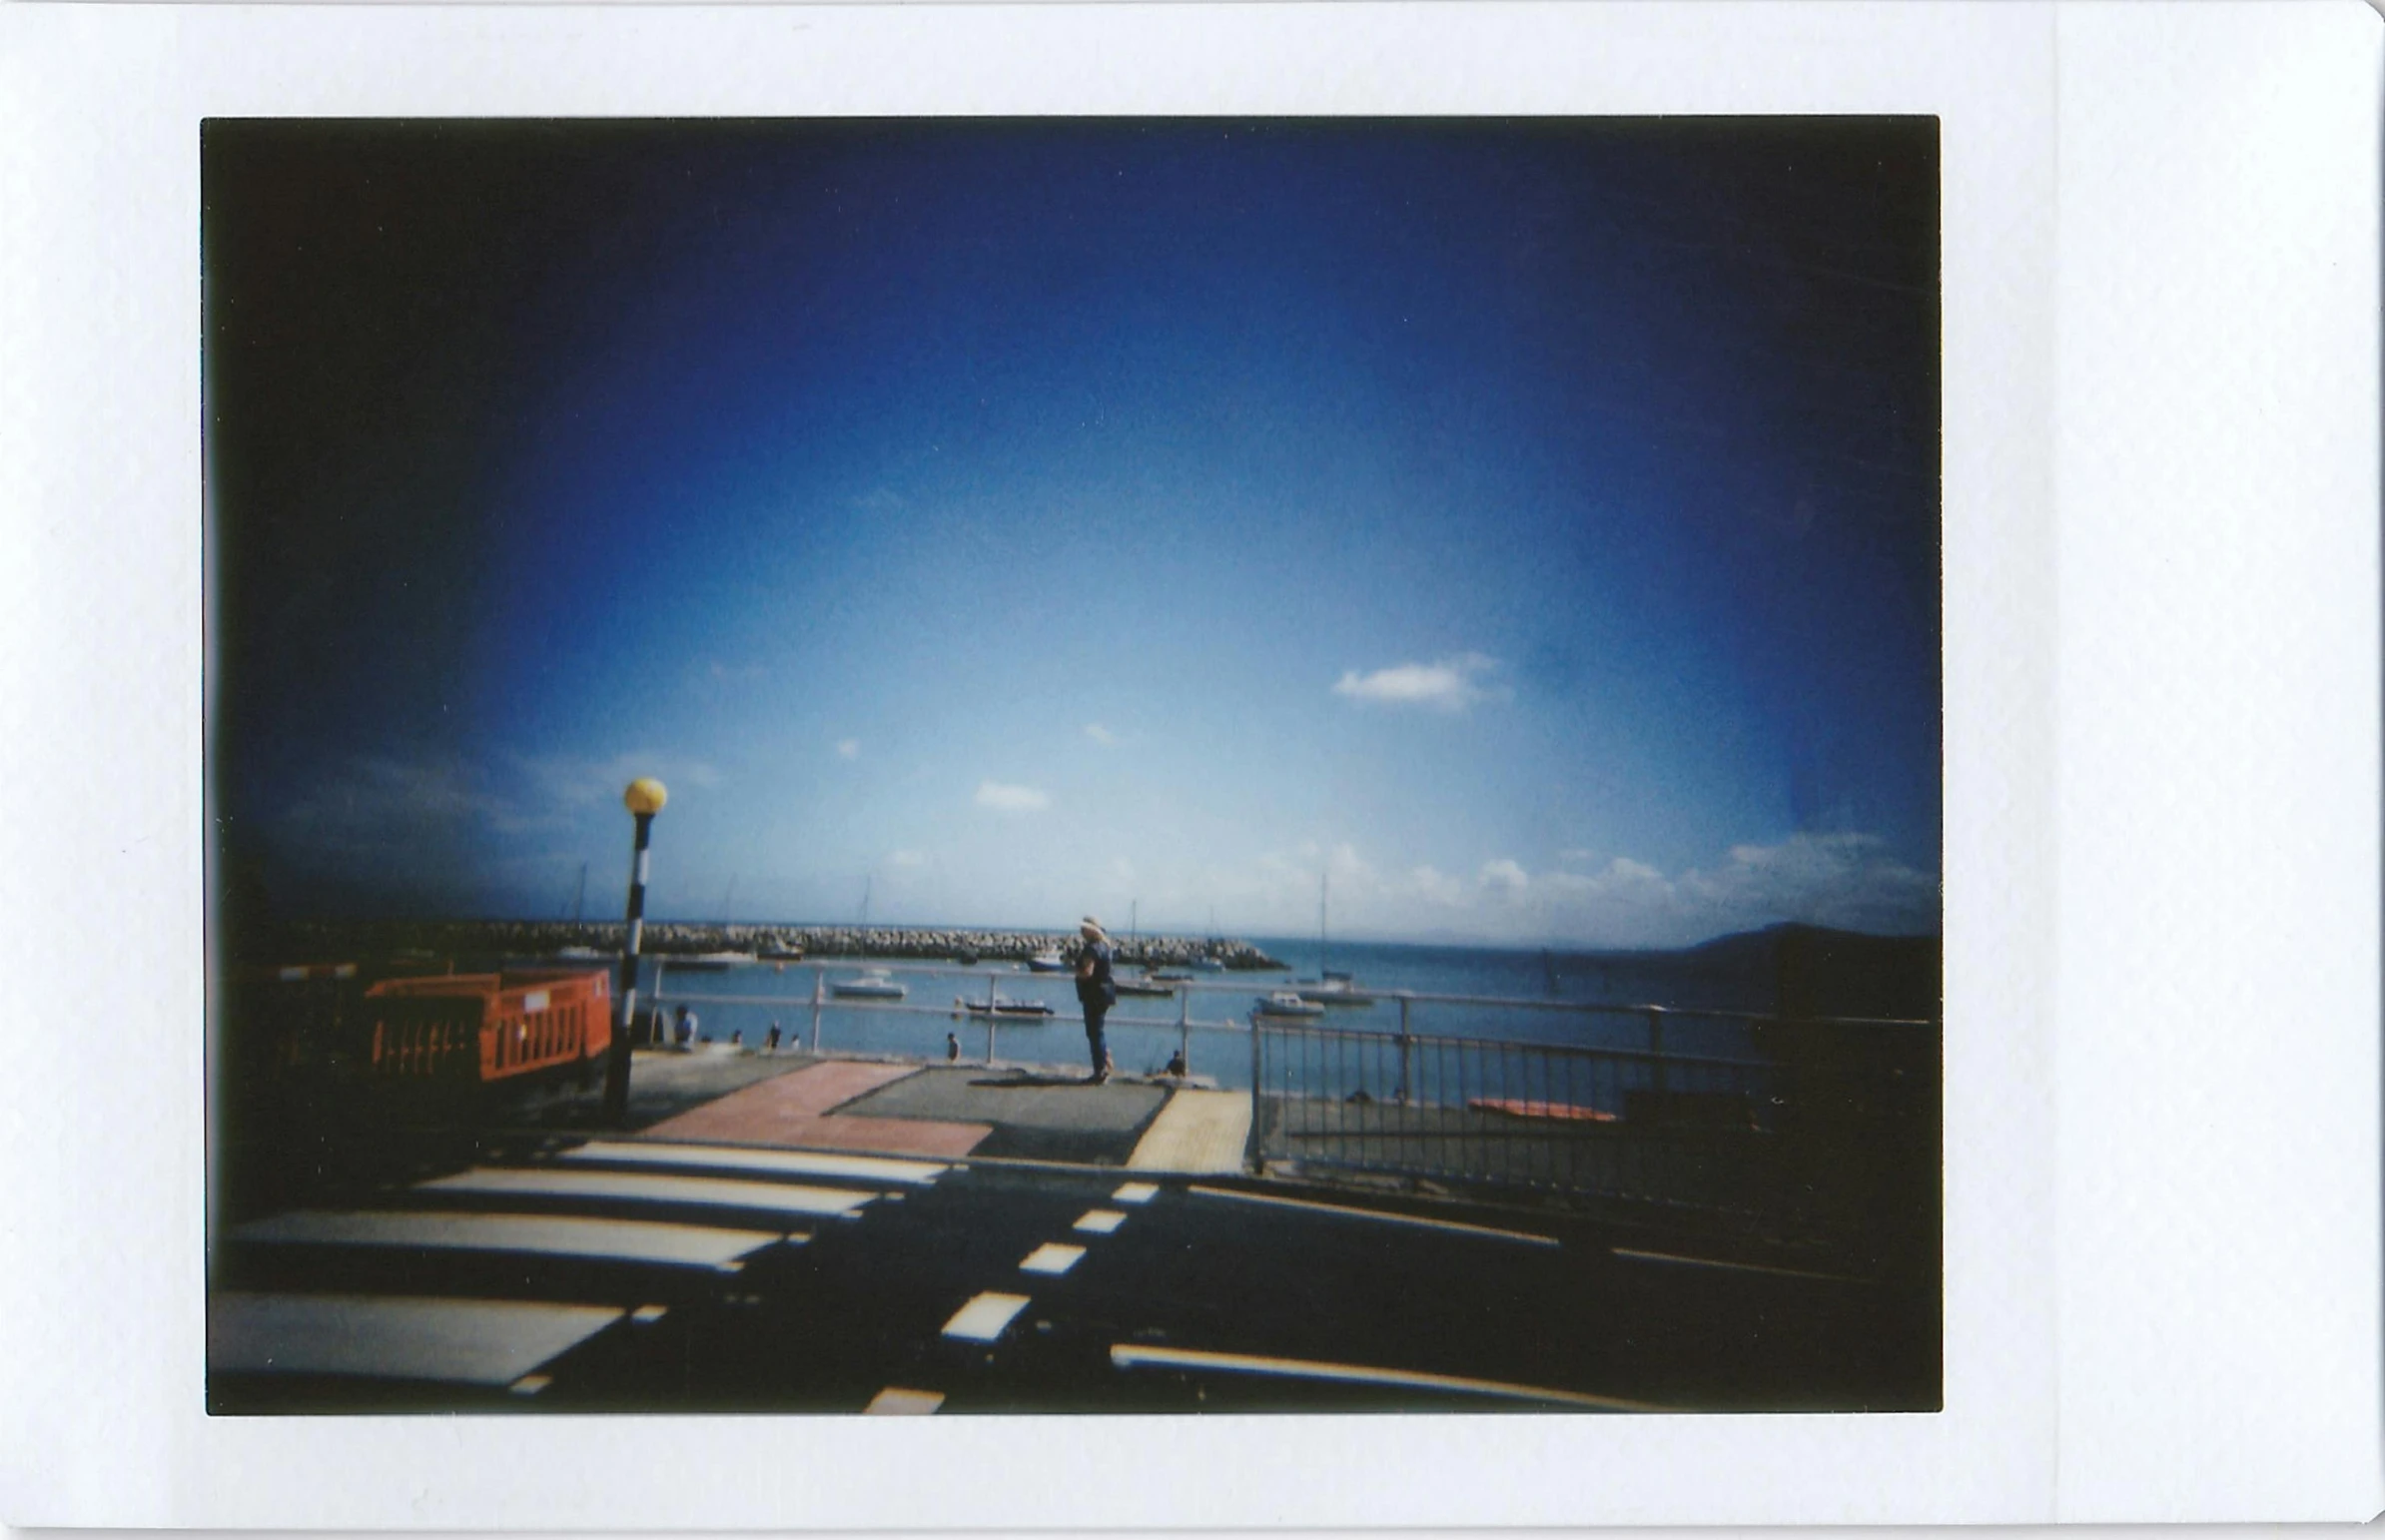 a polaroid po of a person walking on the pier